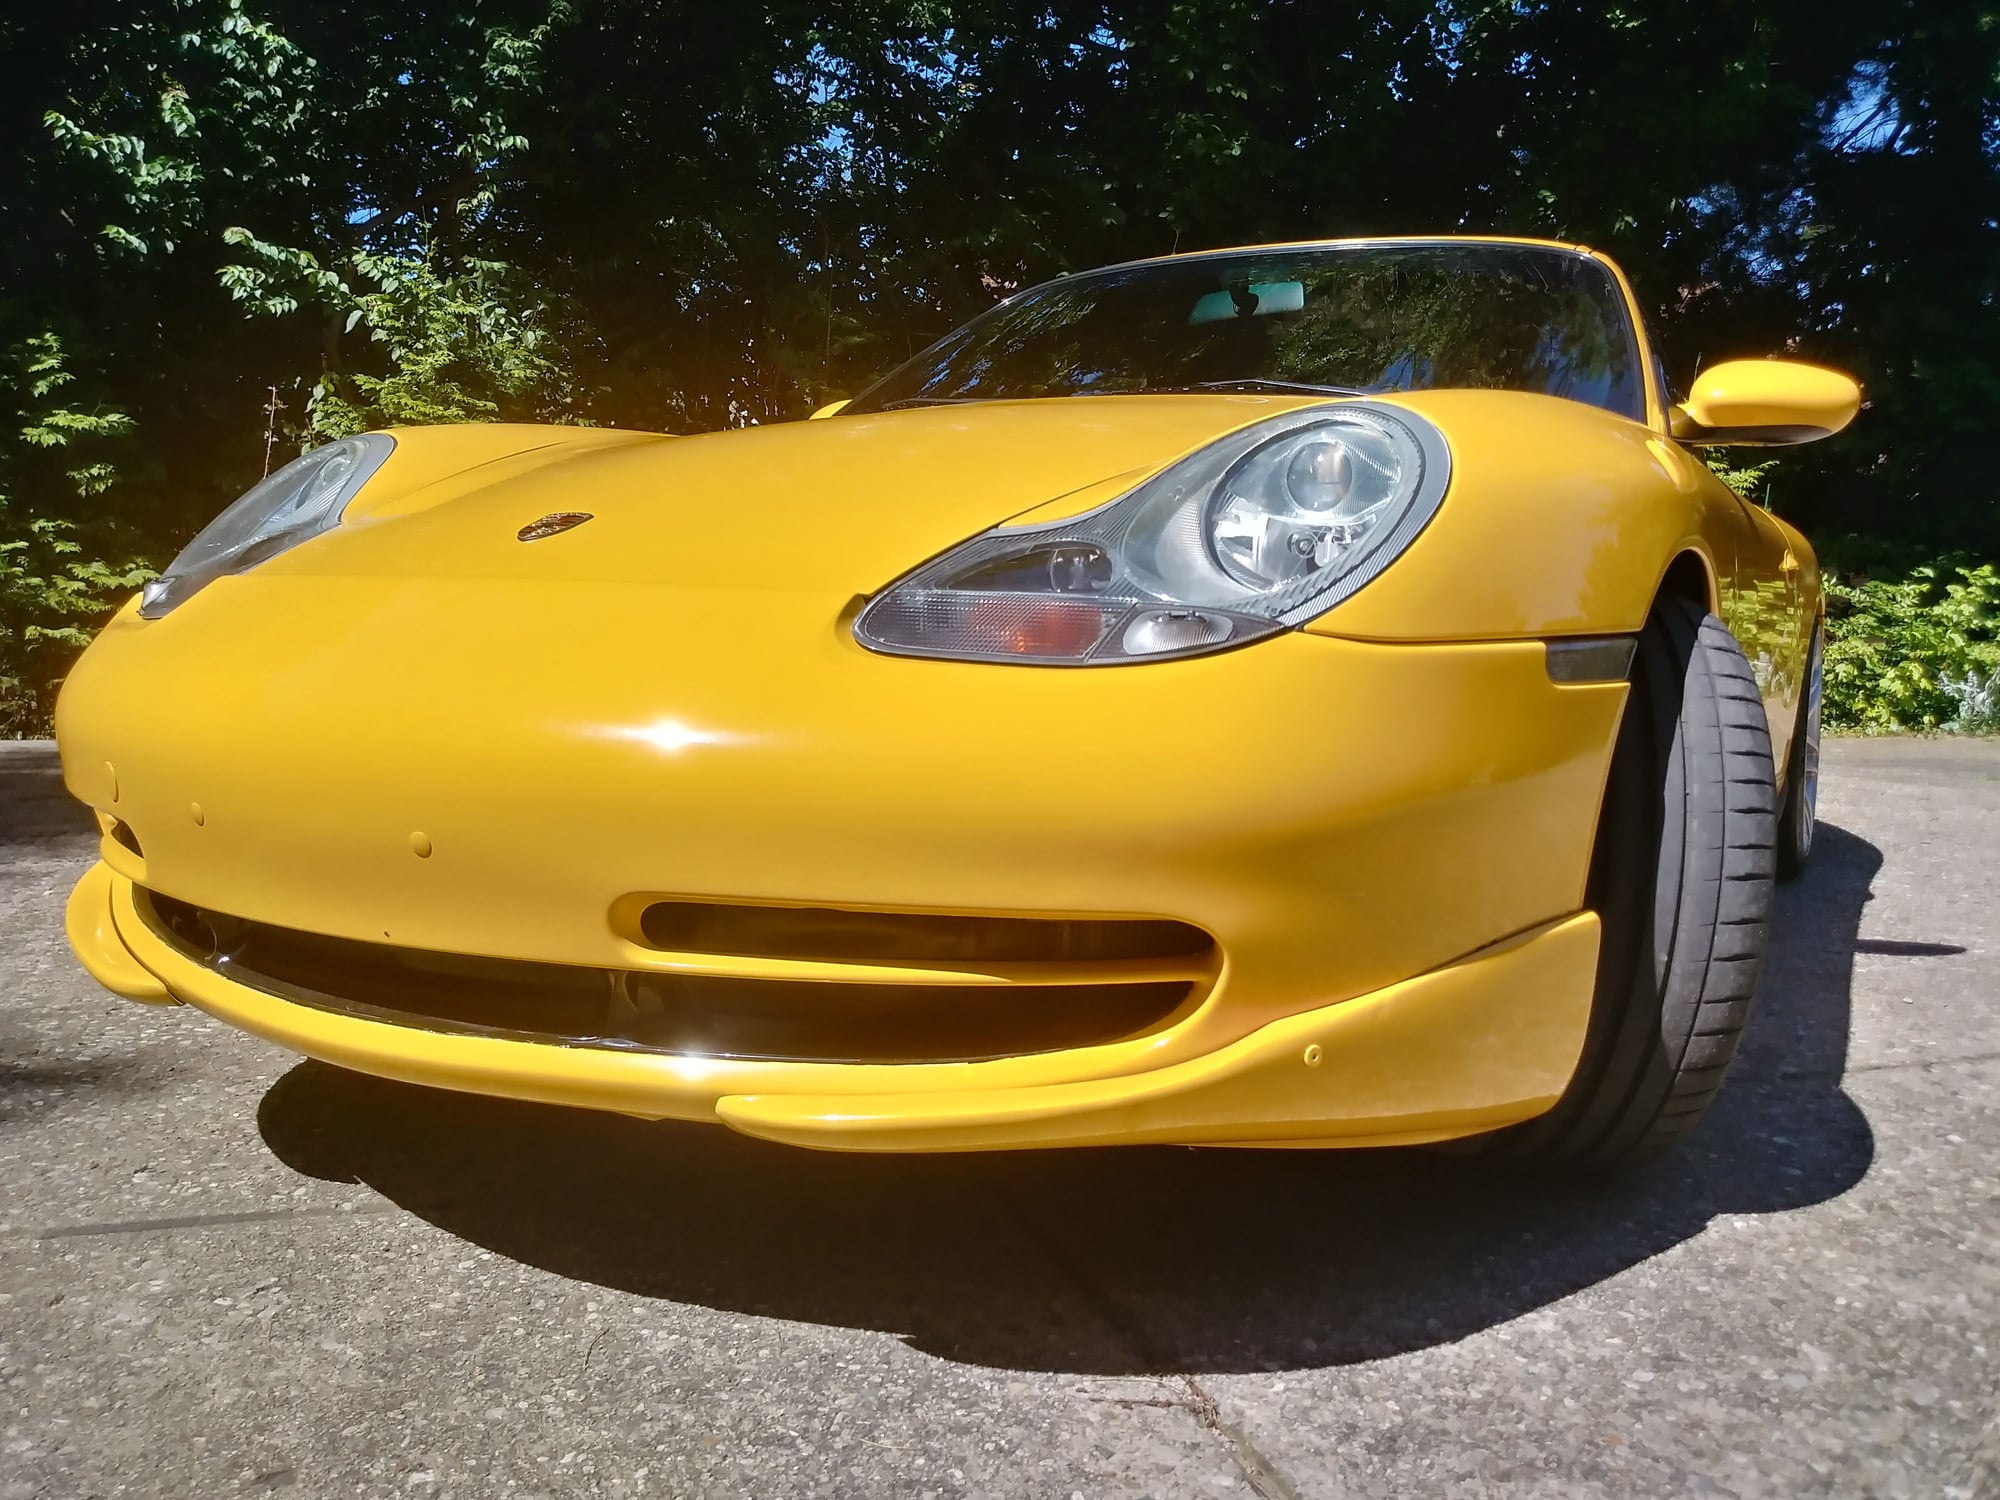 2001 Porsche 911 - 2001 Porsche 996 Carrera-Outstanding- All Services and Docs- Clean Carfax & Title - Used - VIN wp0aa29951s620802 - 50,075 Miles - 6 cyl - 2WD - Manual - Coupe - Yellow - Cincinnati, OH 45245, United States